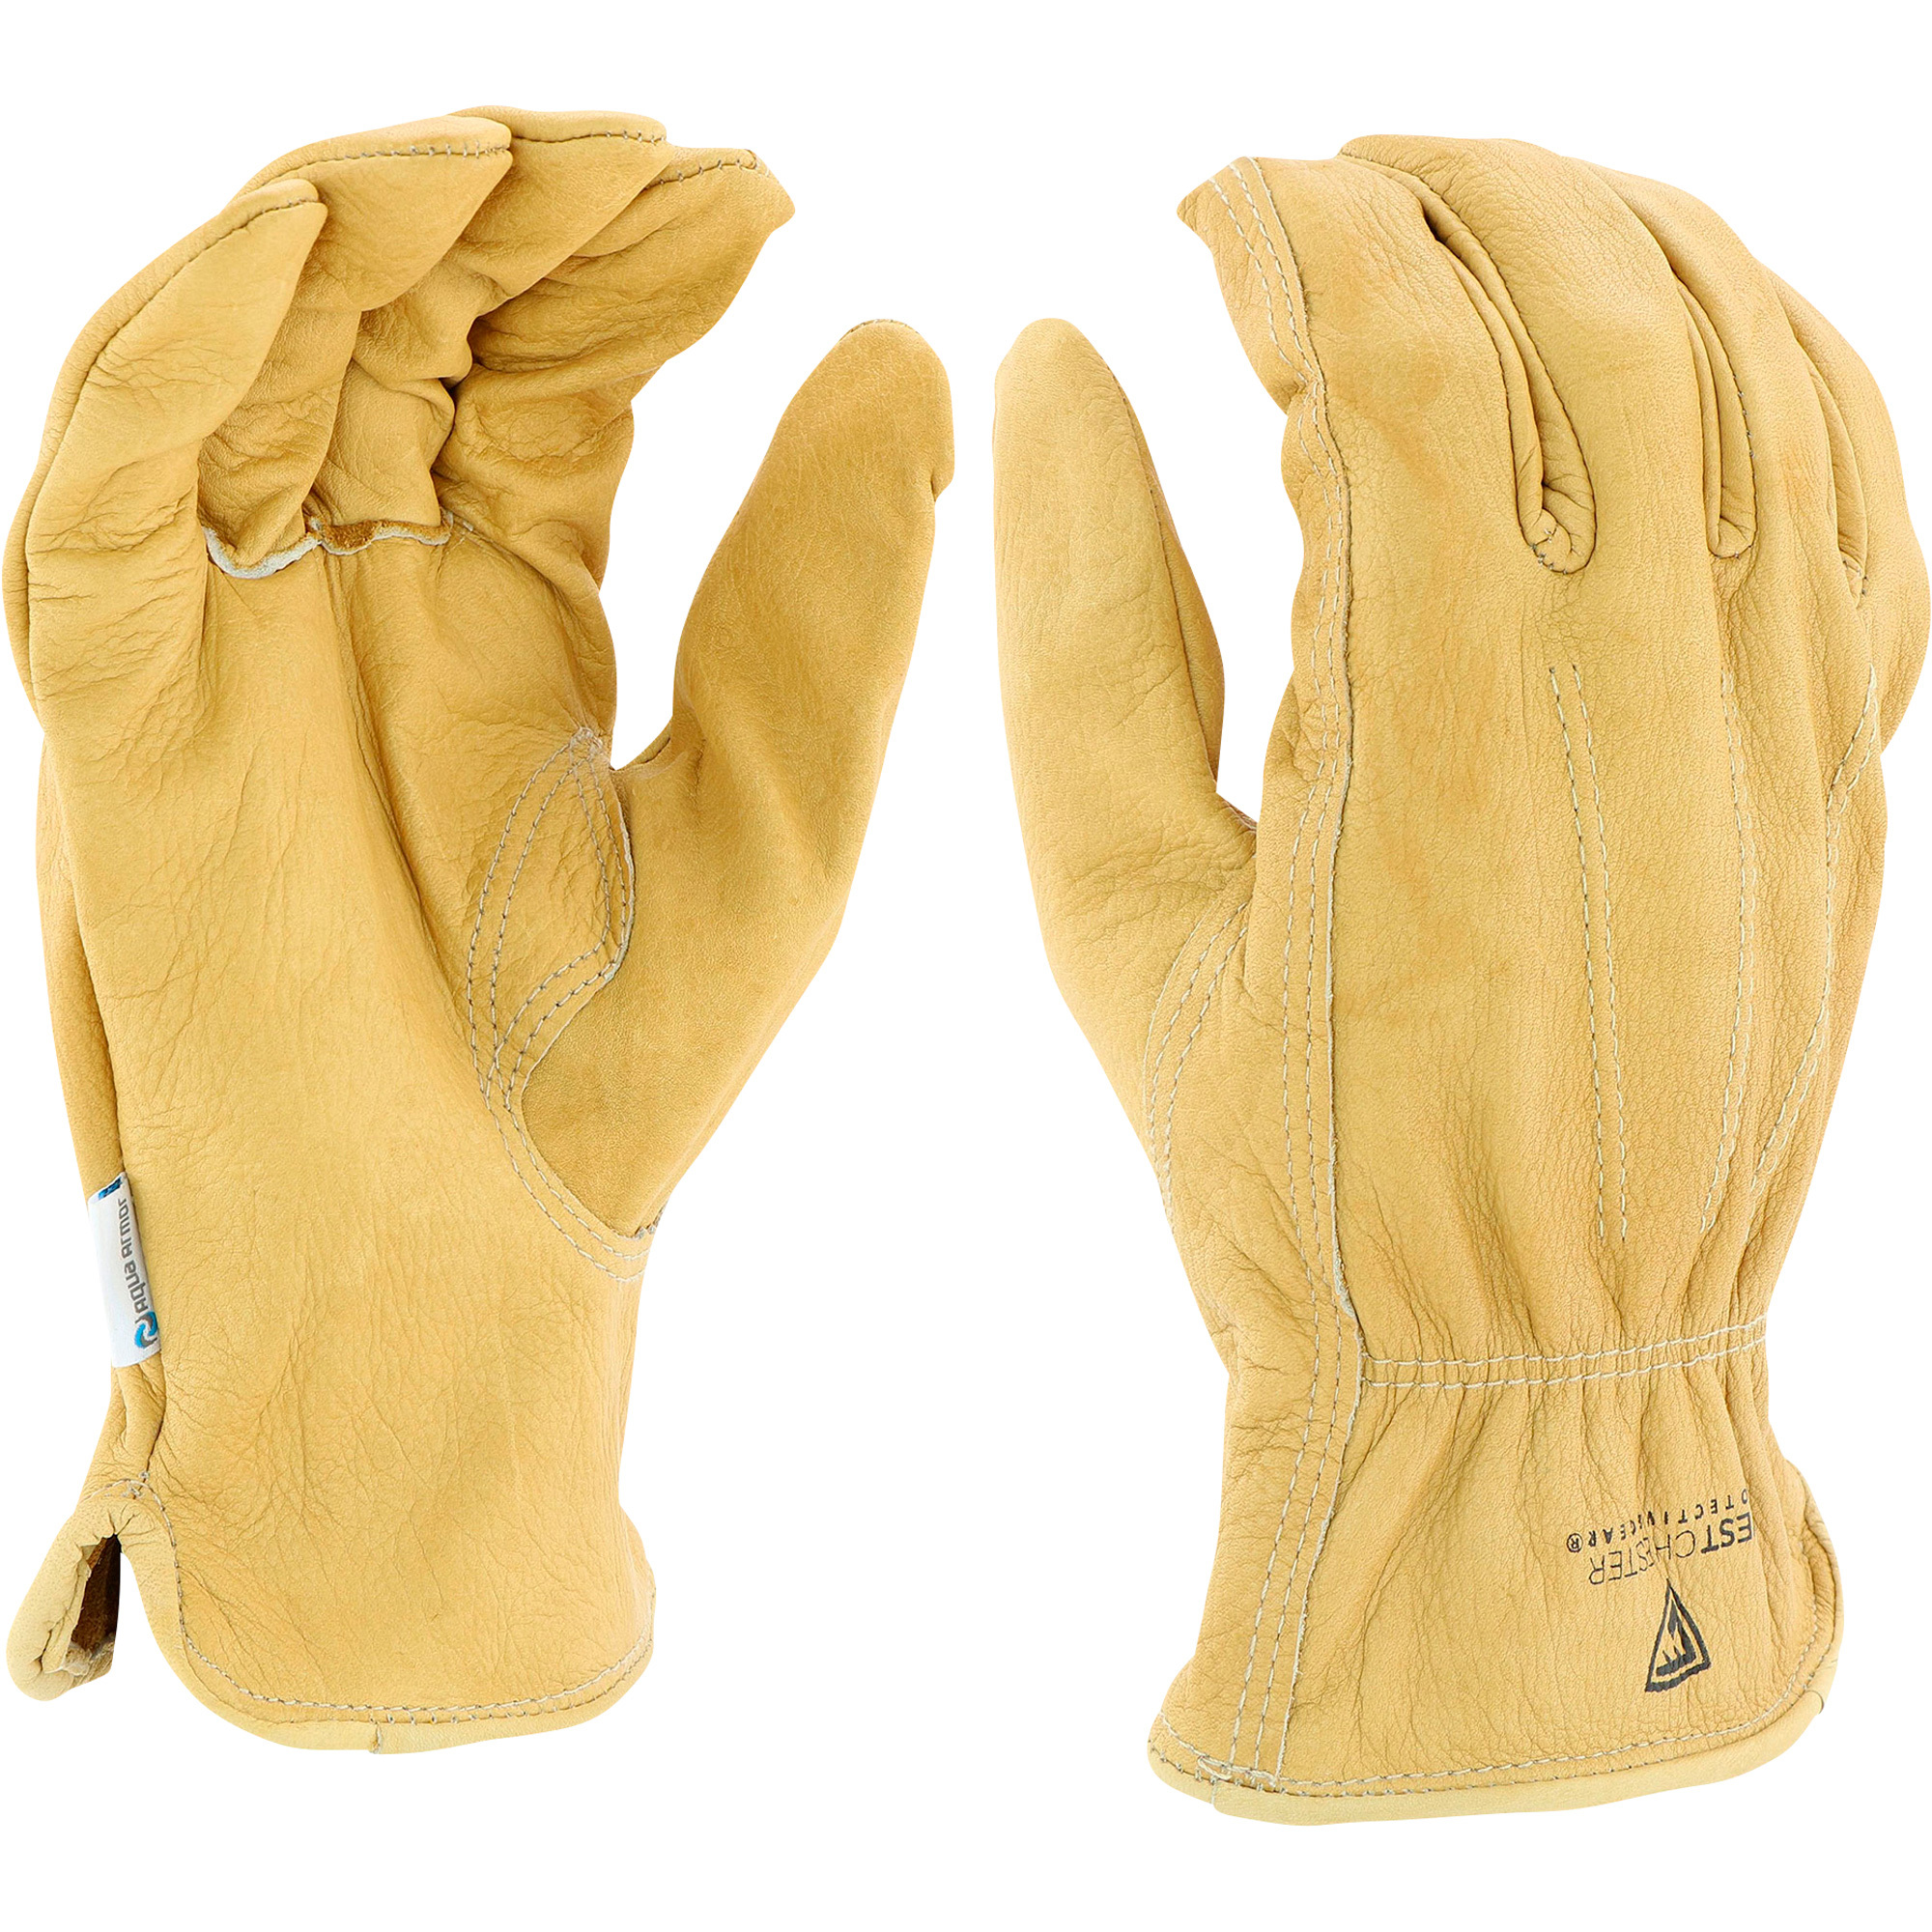 West Chester Protective Gear Men's Water-Resistant Cowhide Work Gloves â Tan, XL, Model 86005-XL